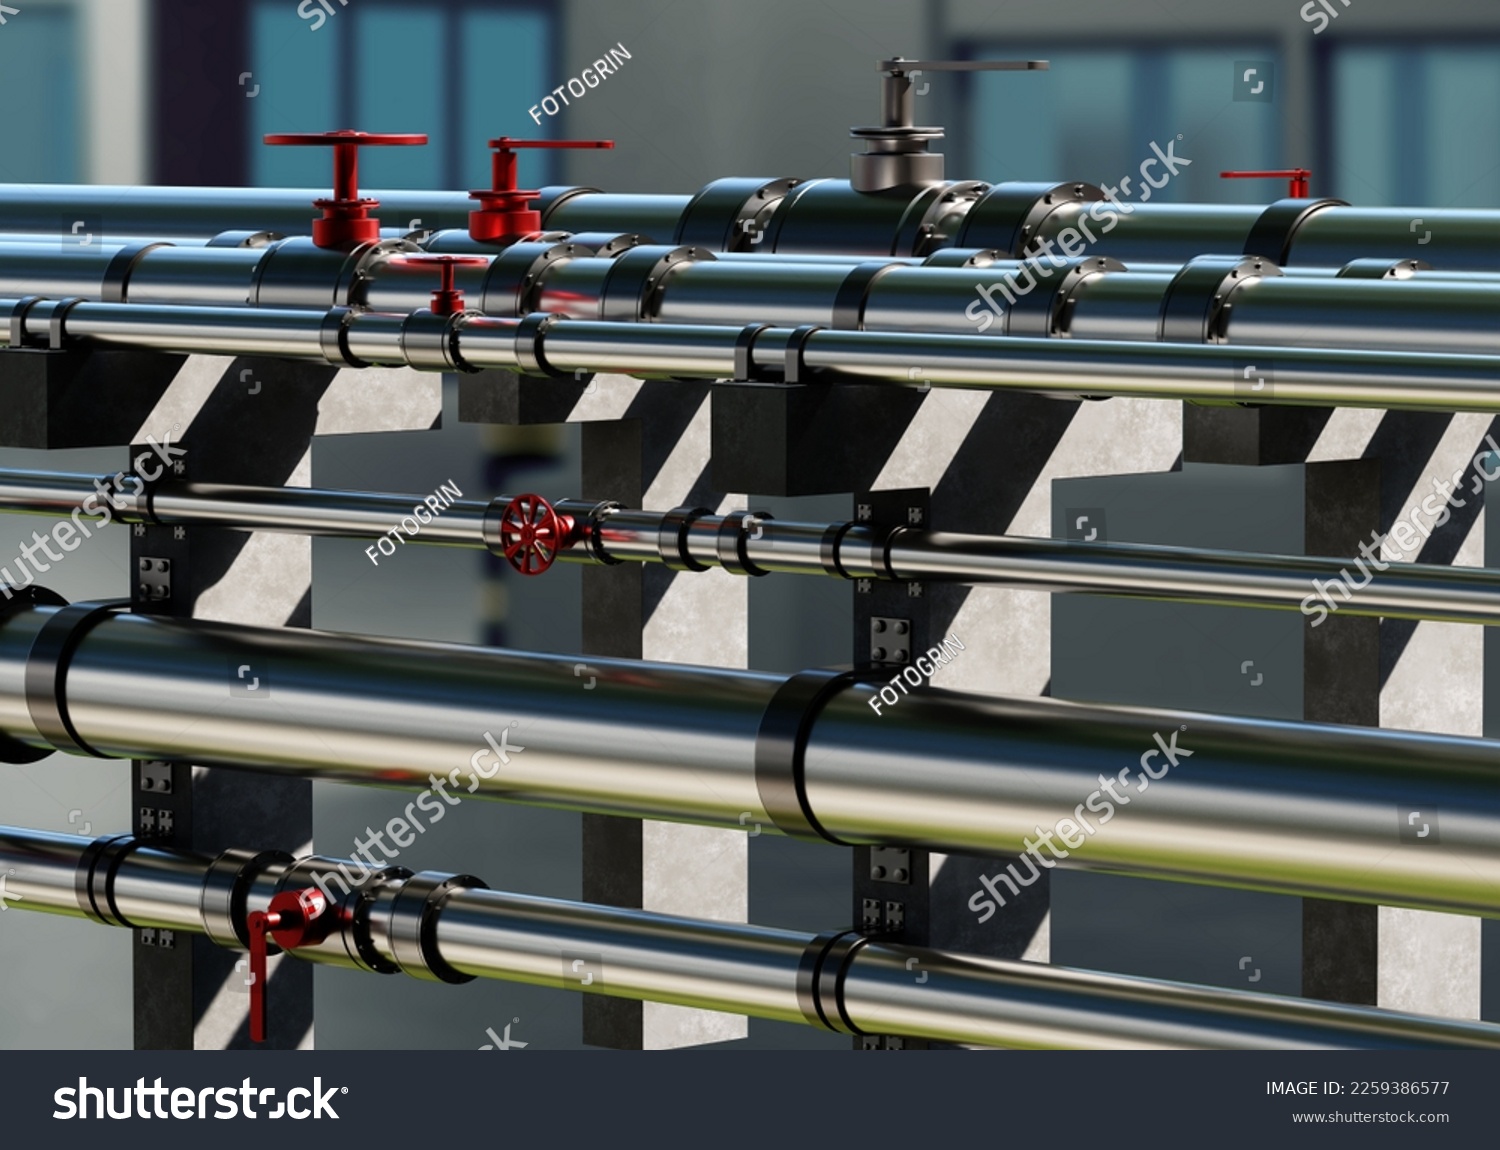 Pipe support images stock photos d objects vectors